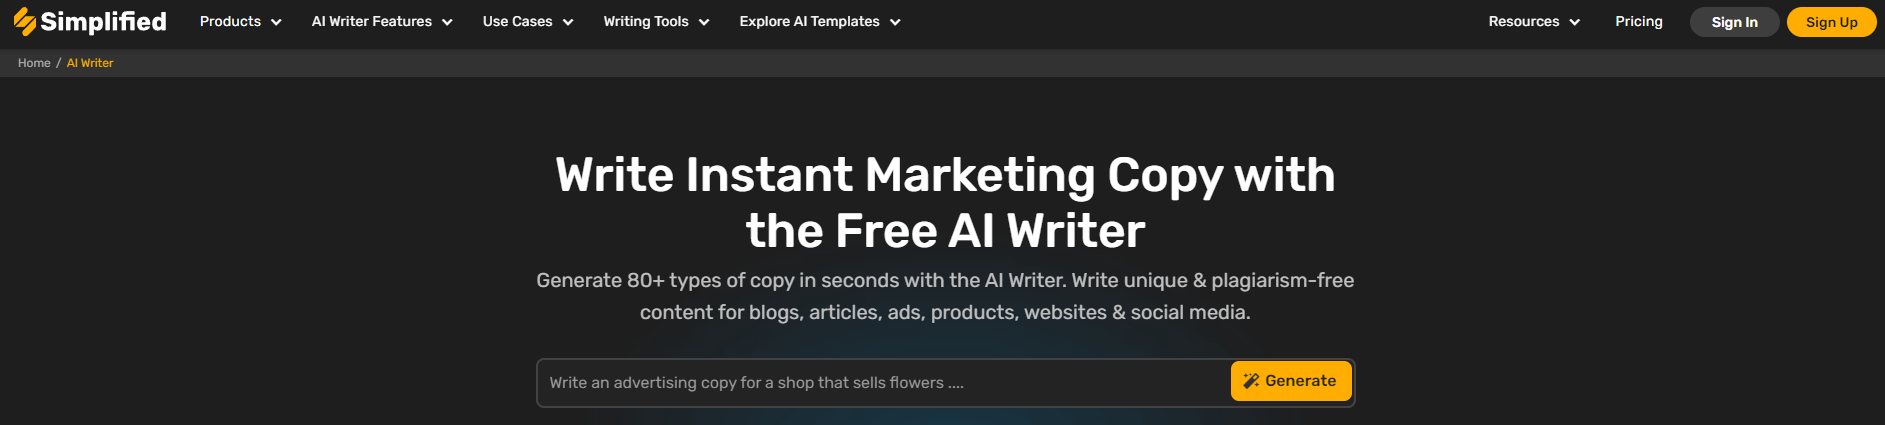 Simplified's webpage featuring 'the Free AI Writer', an AI tool for creating instant marketing copy for various content types.